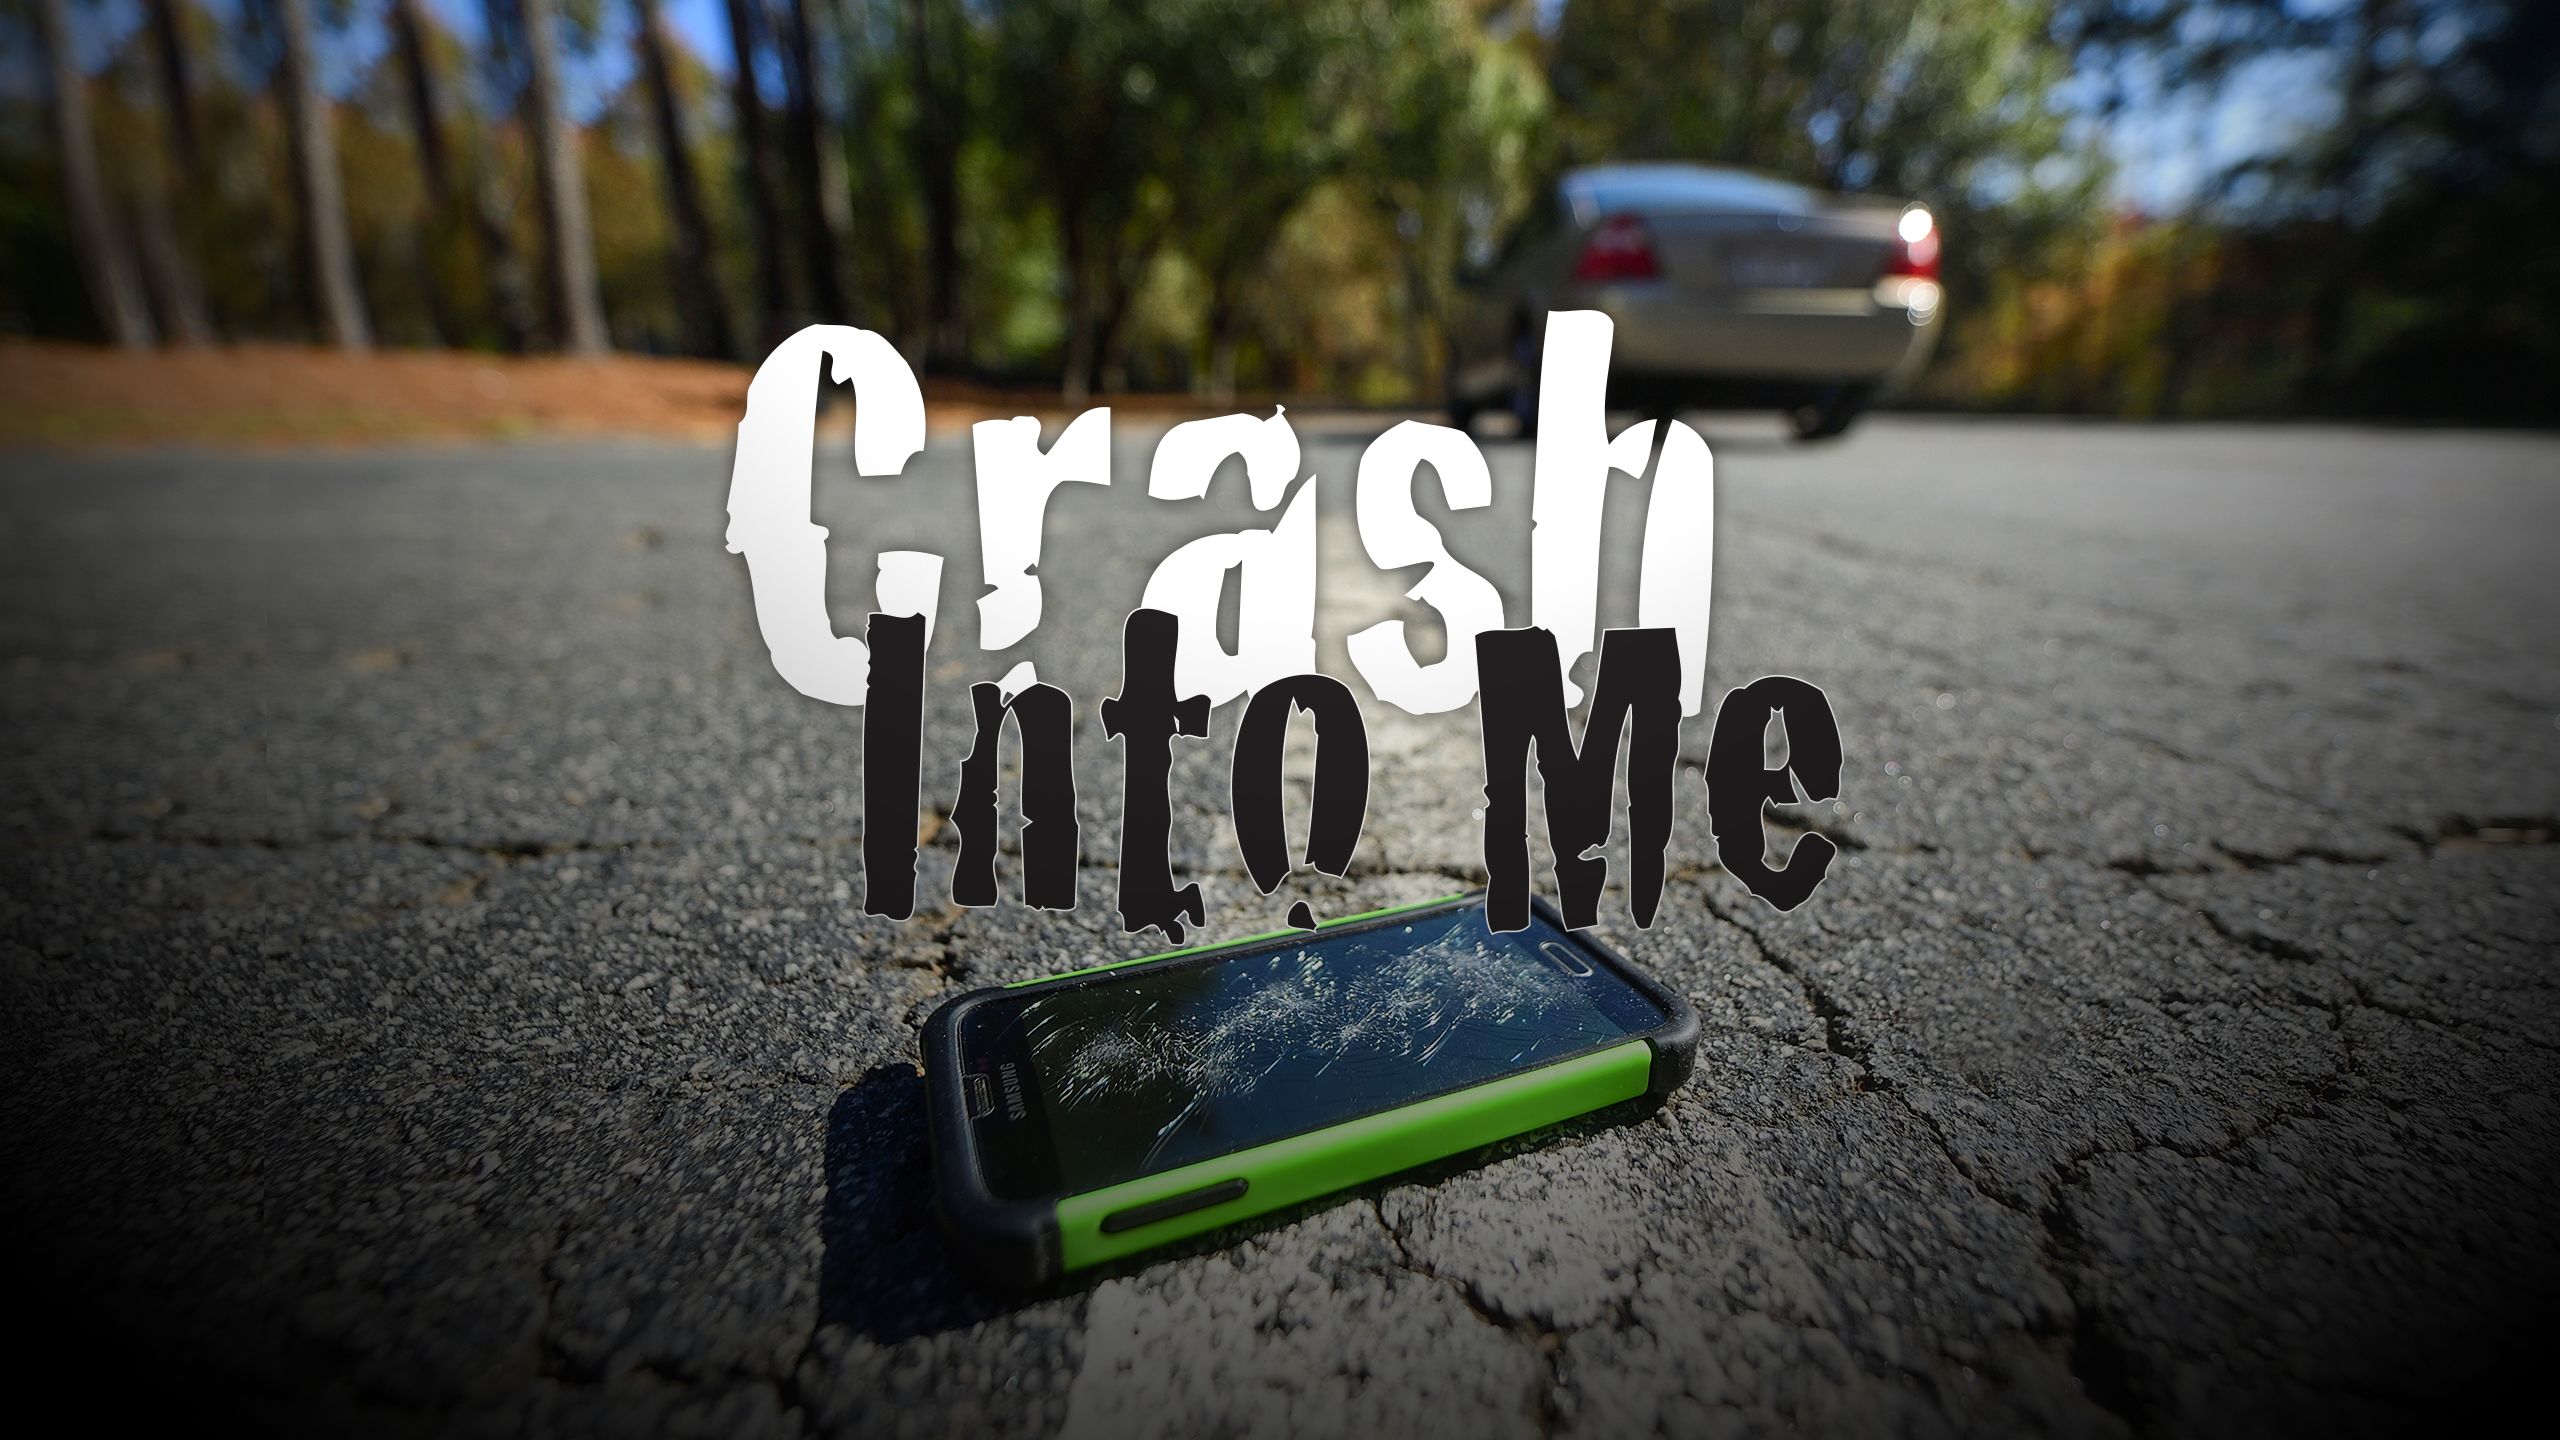 Crushed cell phone lying in the middle of a road as a photo illustration with the words "Crash Into Me" over it.